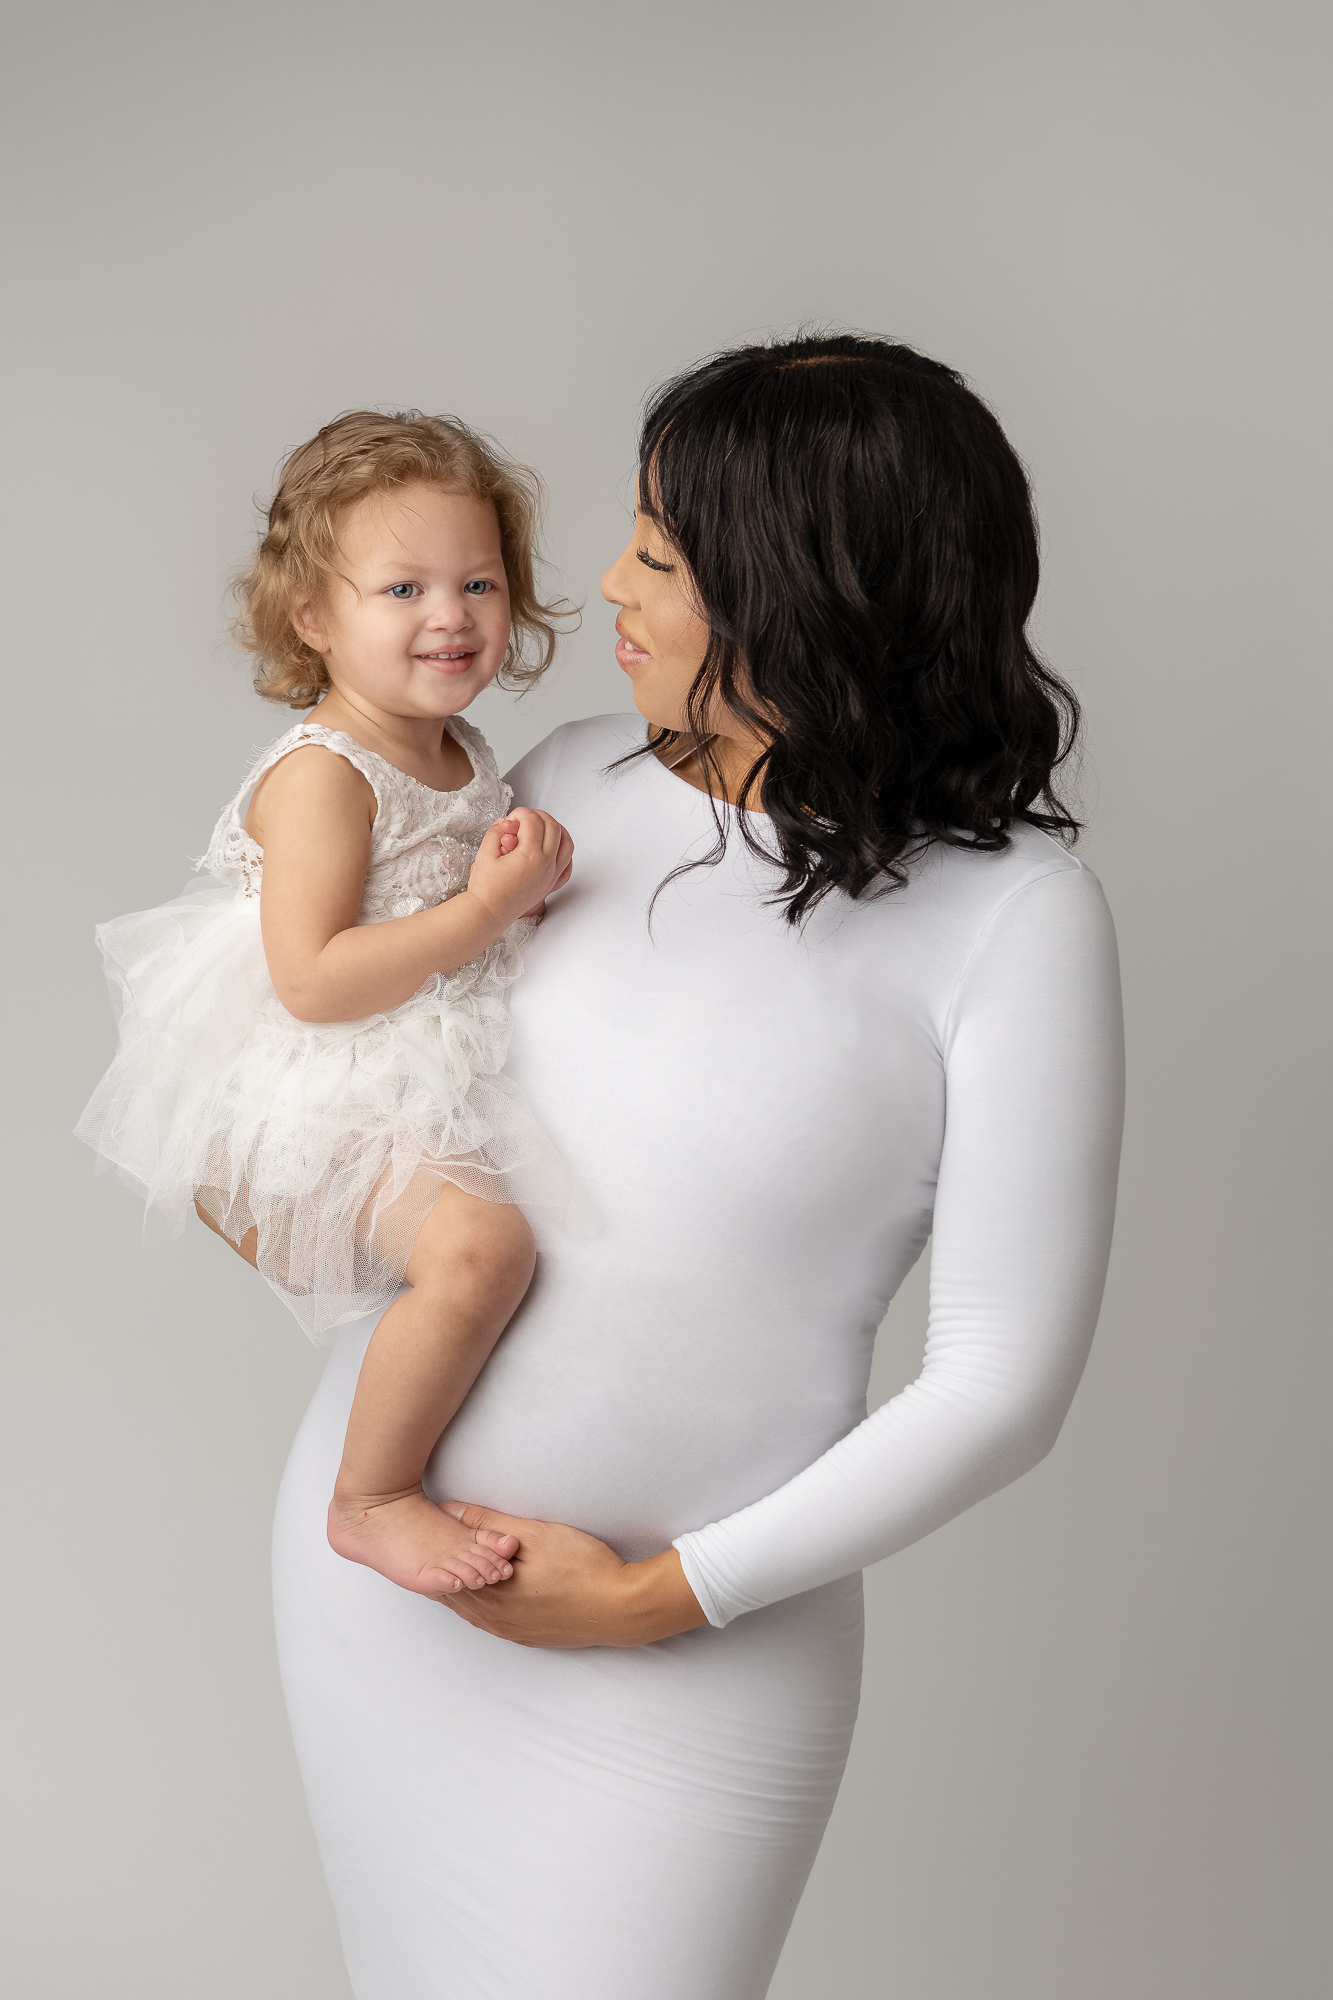 mom to be holding her daughter on her hip both dressed in white